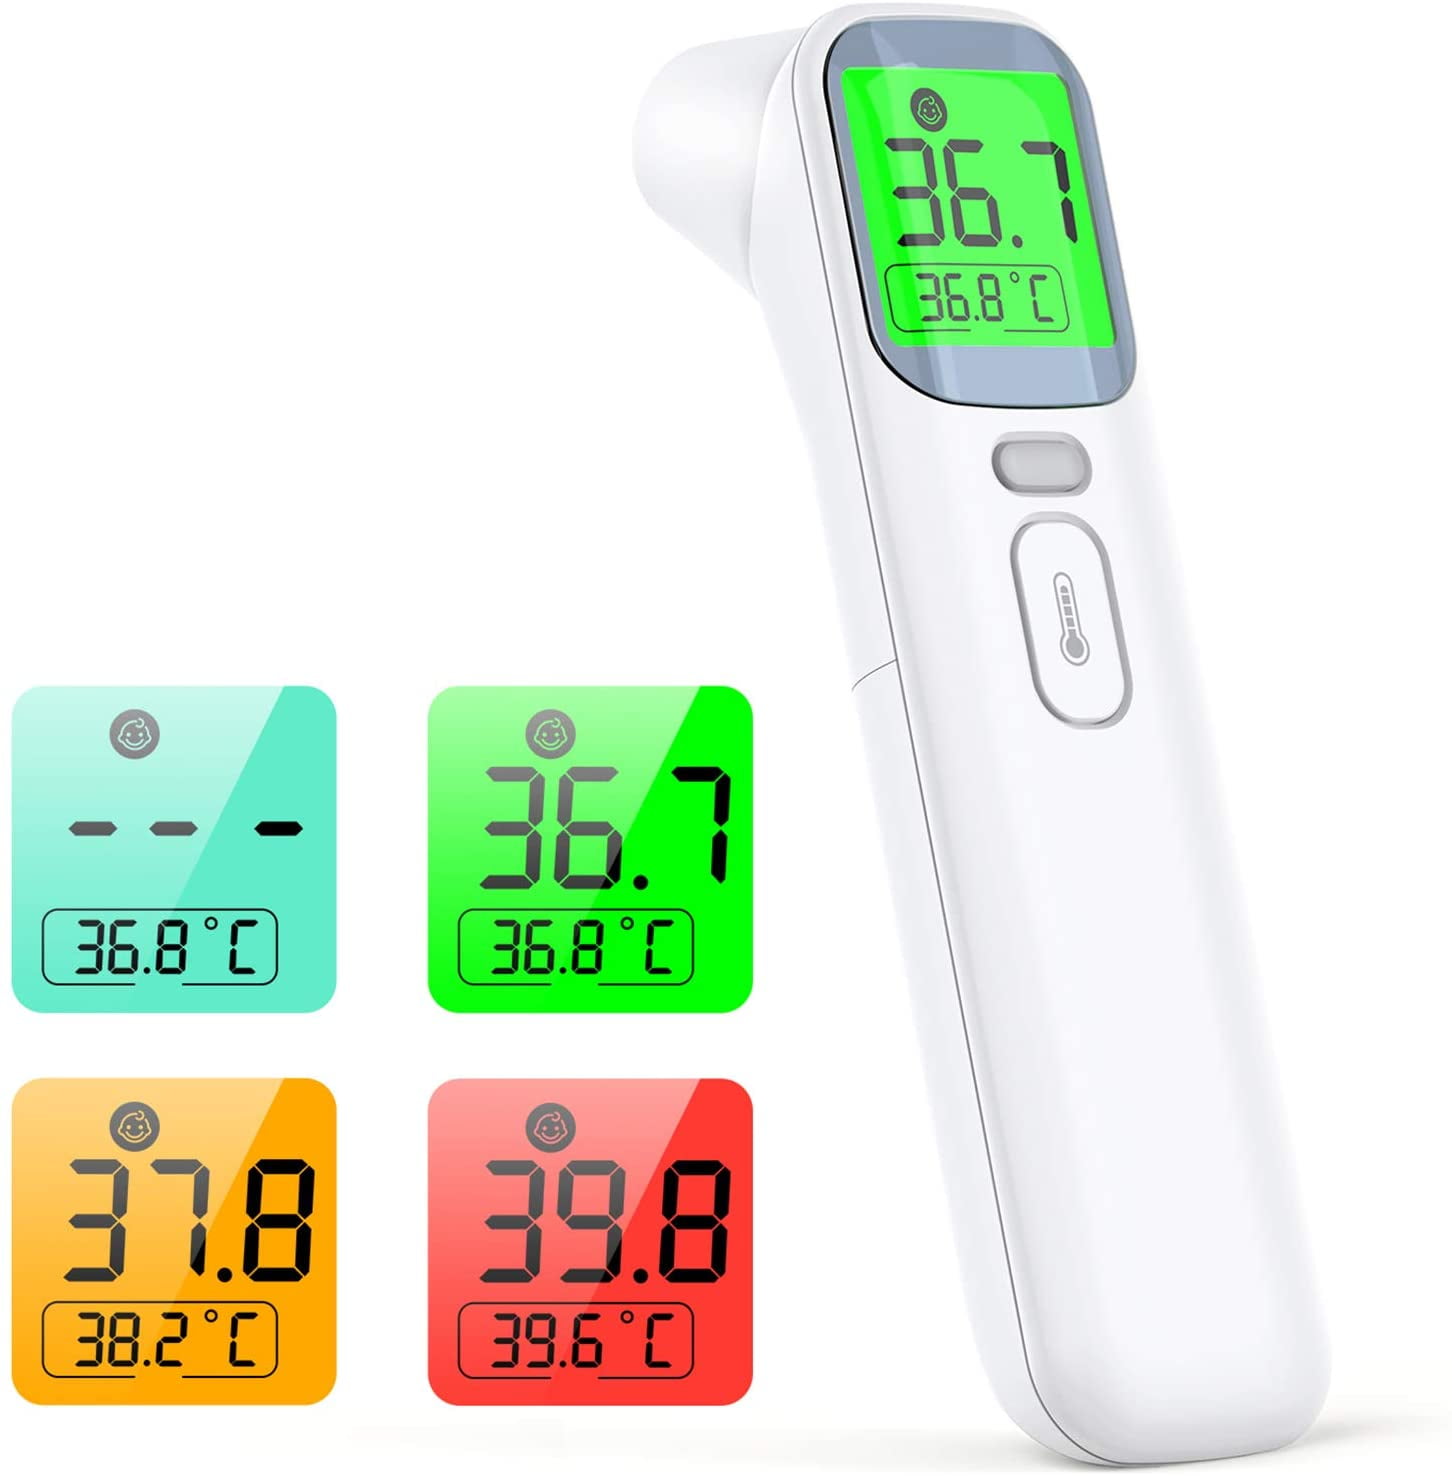 Infrared Thermometer Baby Temperature ， Portable Travel LCD Non-Contact IR Red Infrared Ray Electronic Thermometer Medical Health Care Measurement Meter Warning Alarm